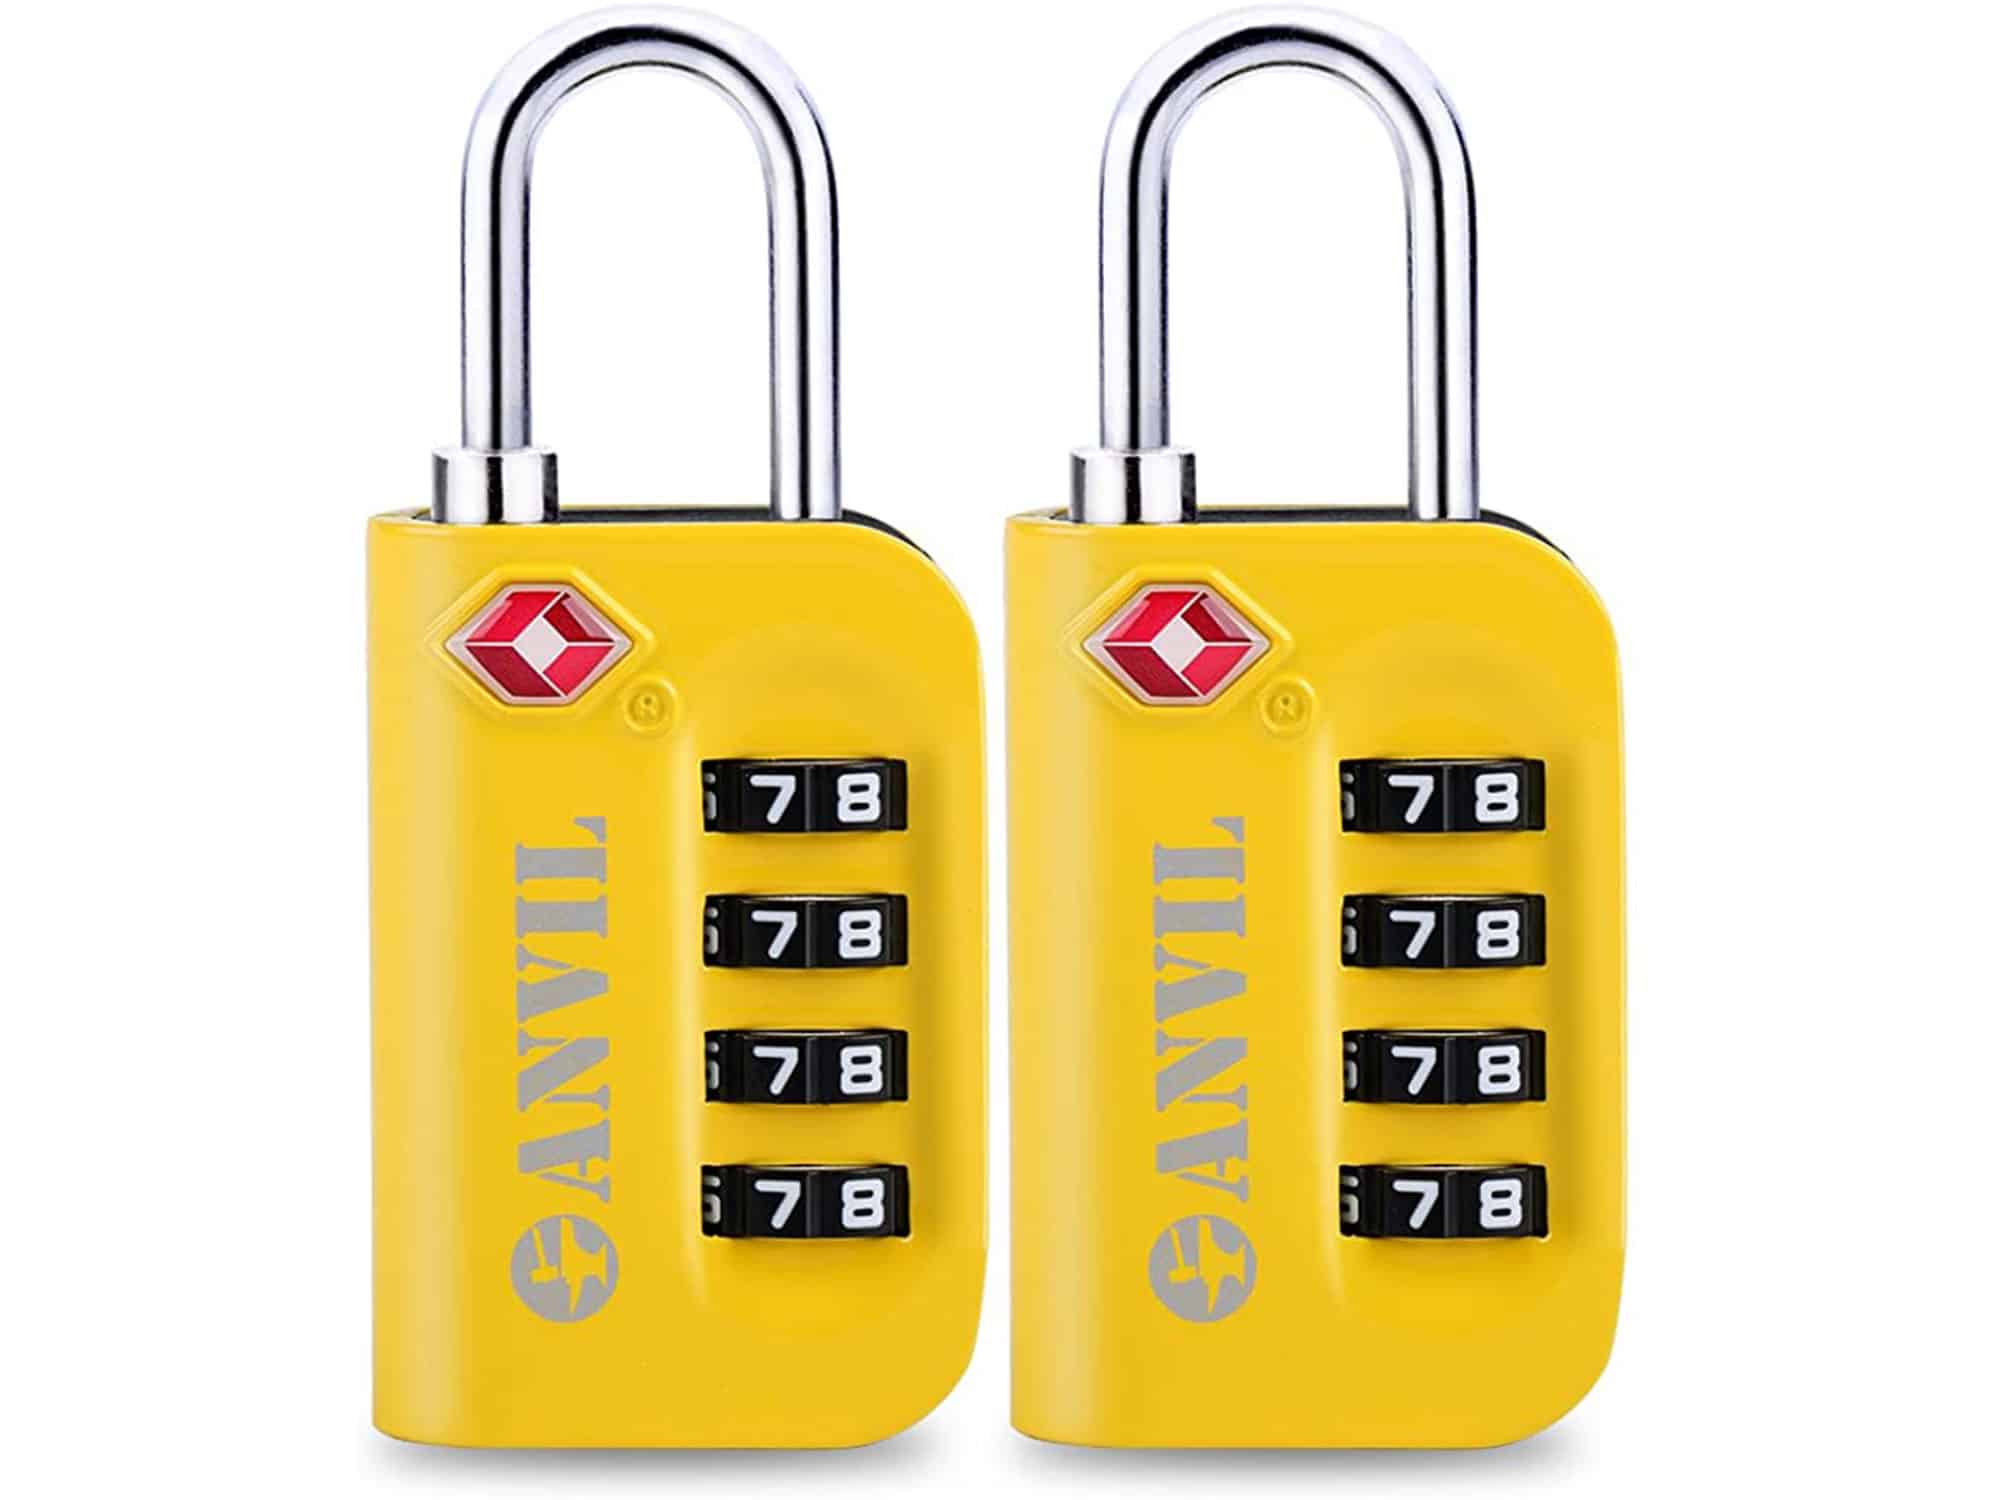 TSA Approved Luggage Lock - 4 Digit Combination Padlocks with a Hardened Steel Shackle - Travel Locks for Suitcases & Baggage